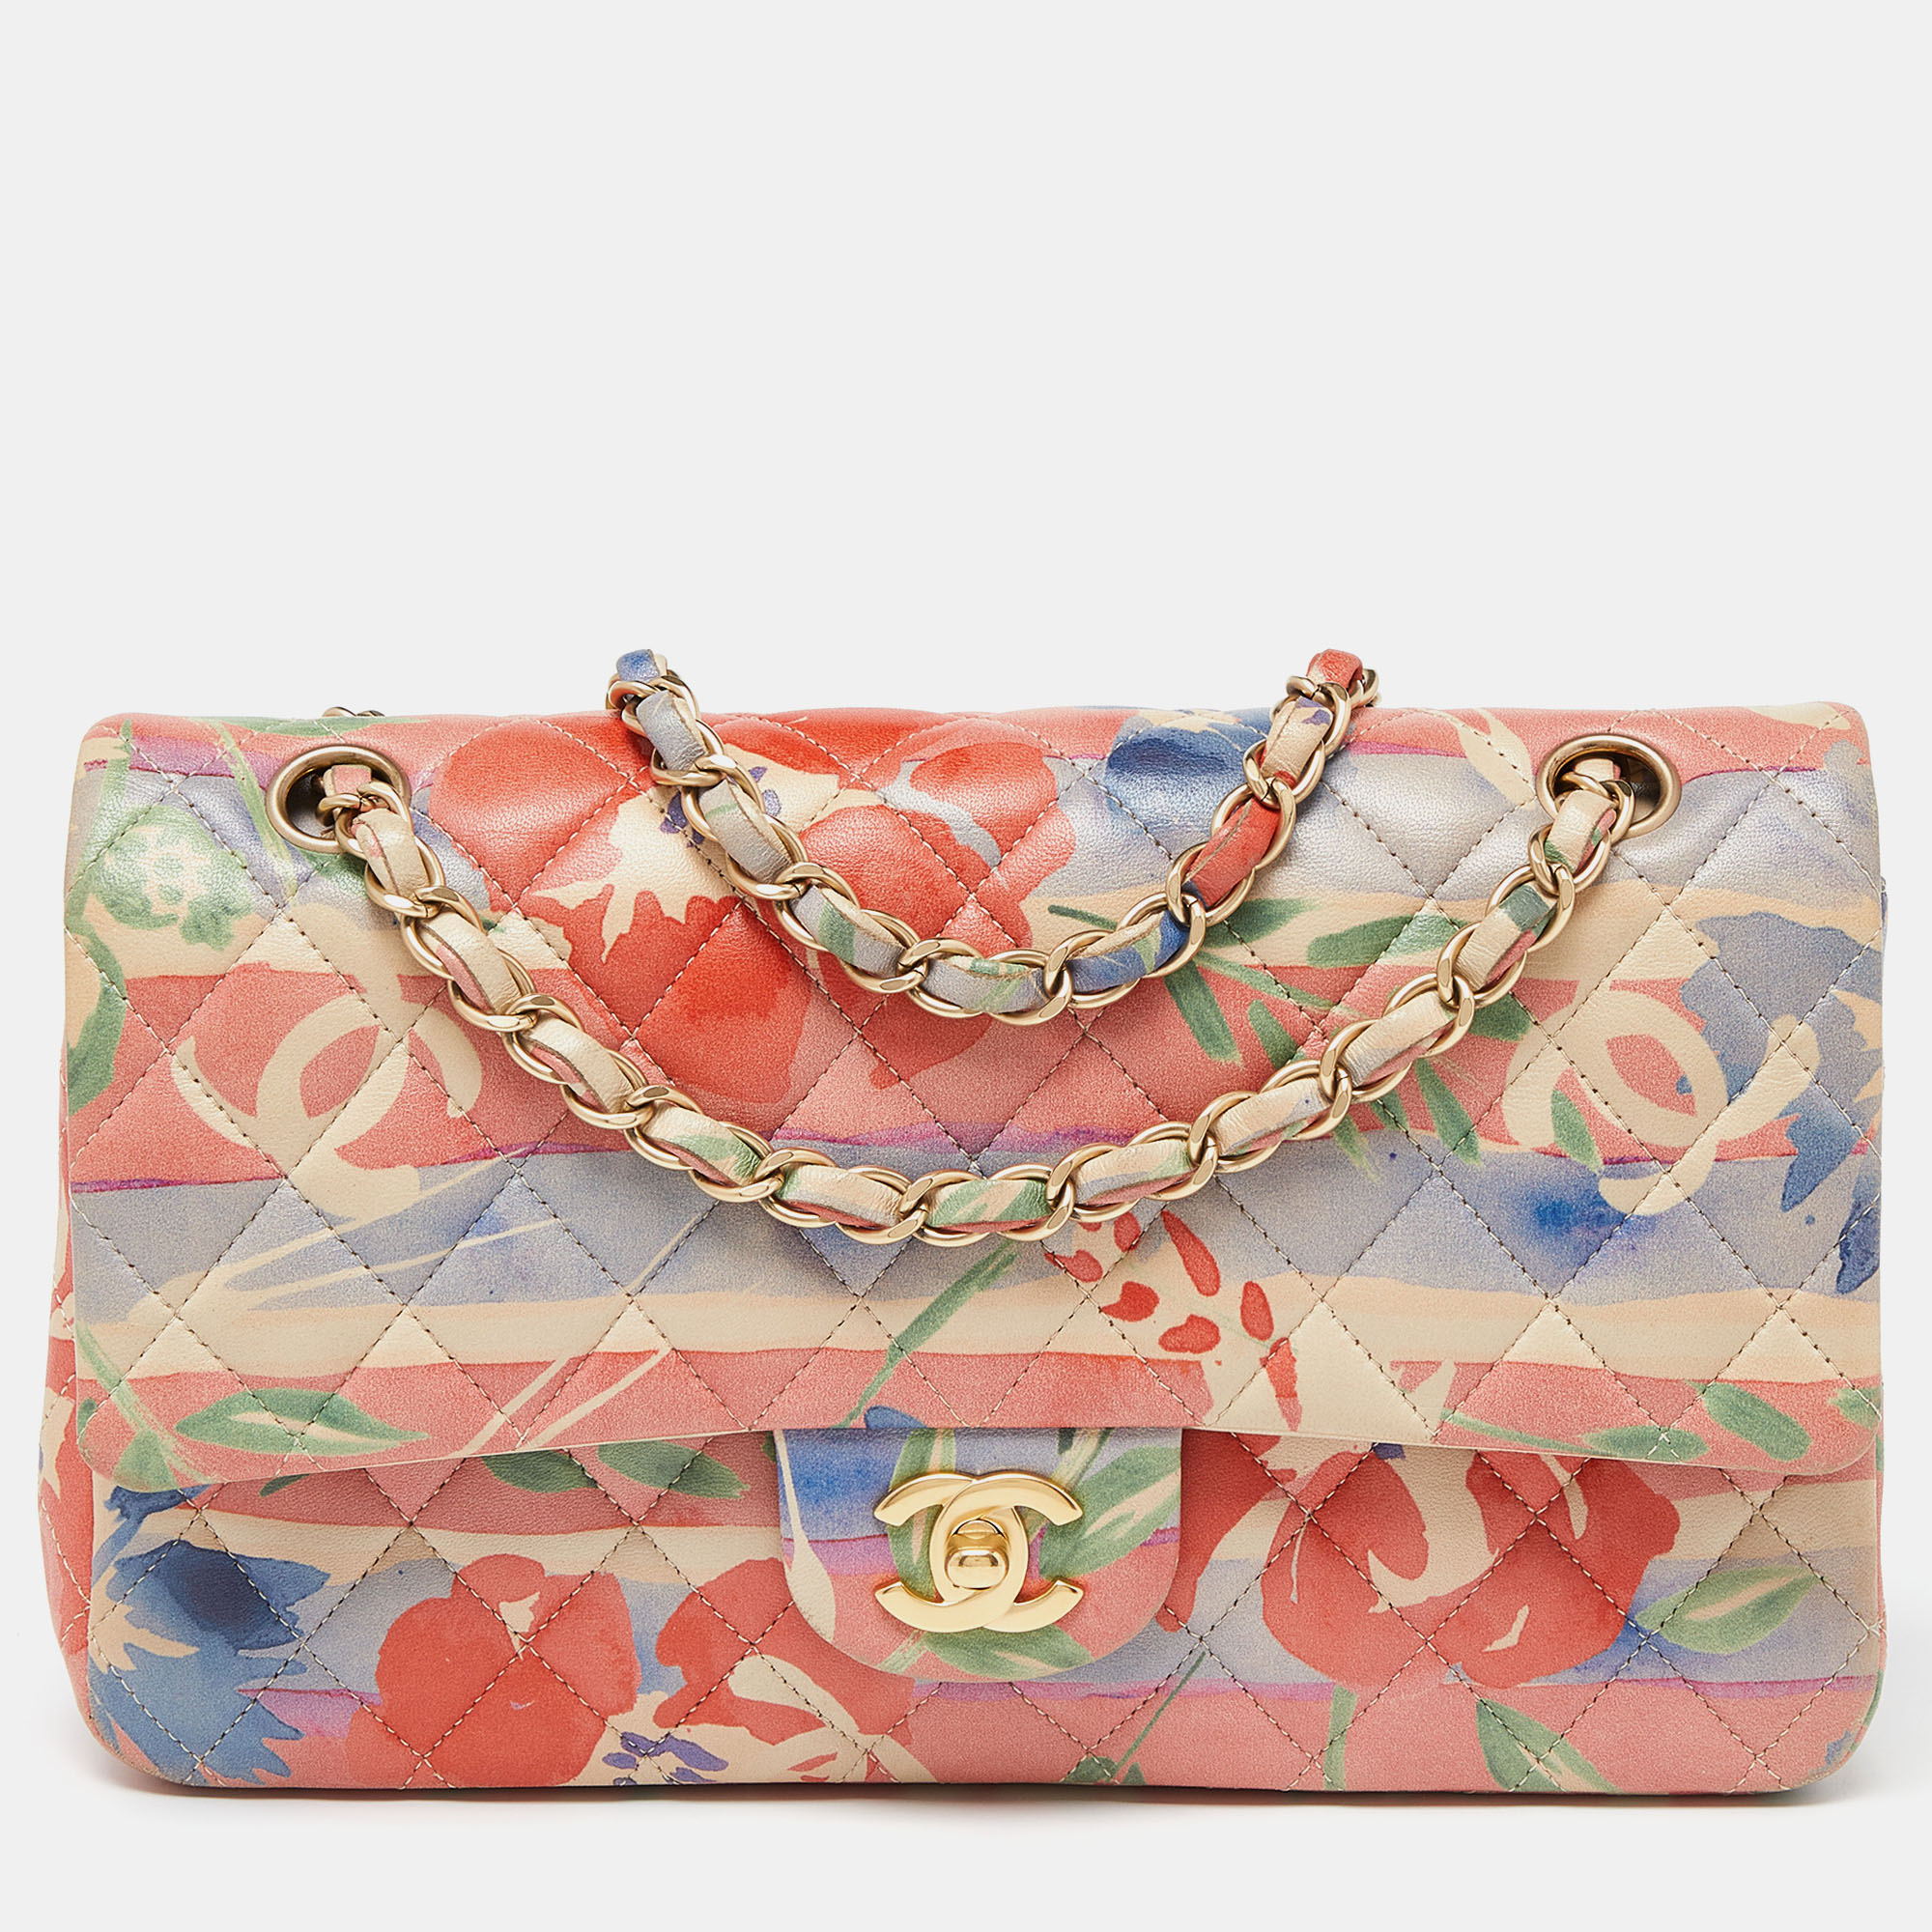 Chanel Multicolor Quilted Floral Print Leather Medium Classic Double Flap Bag